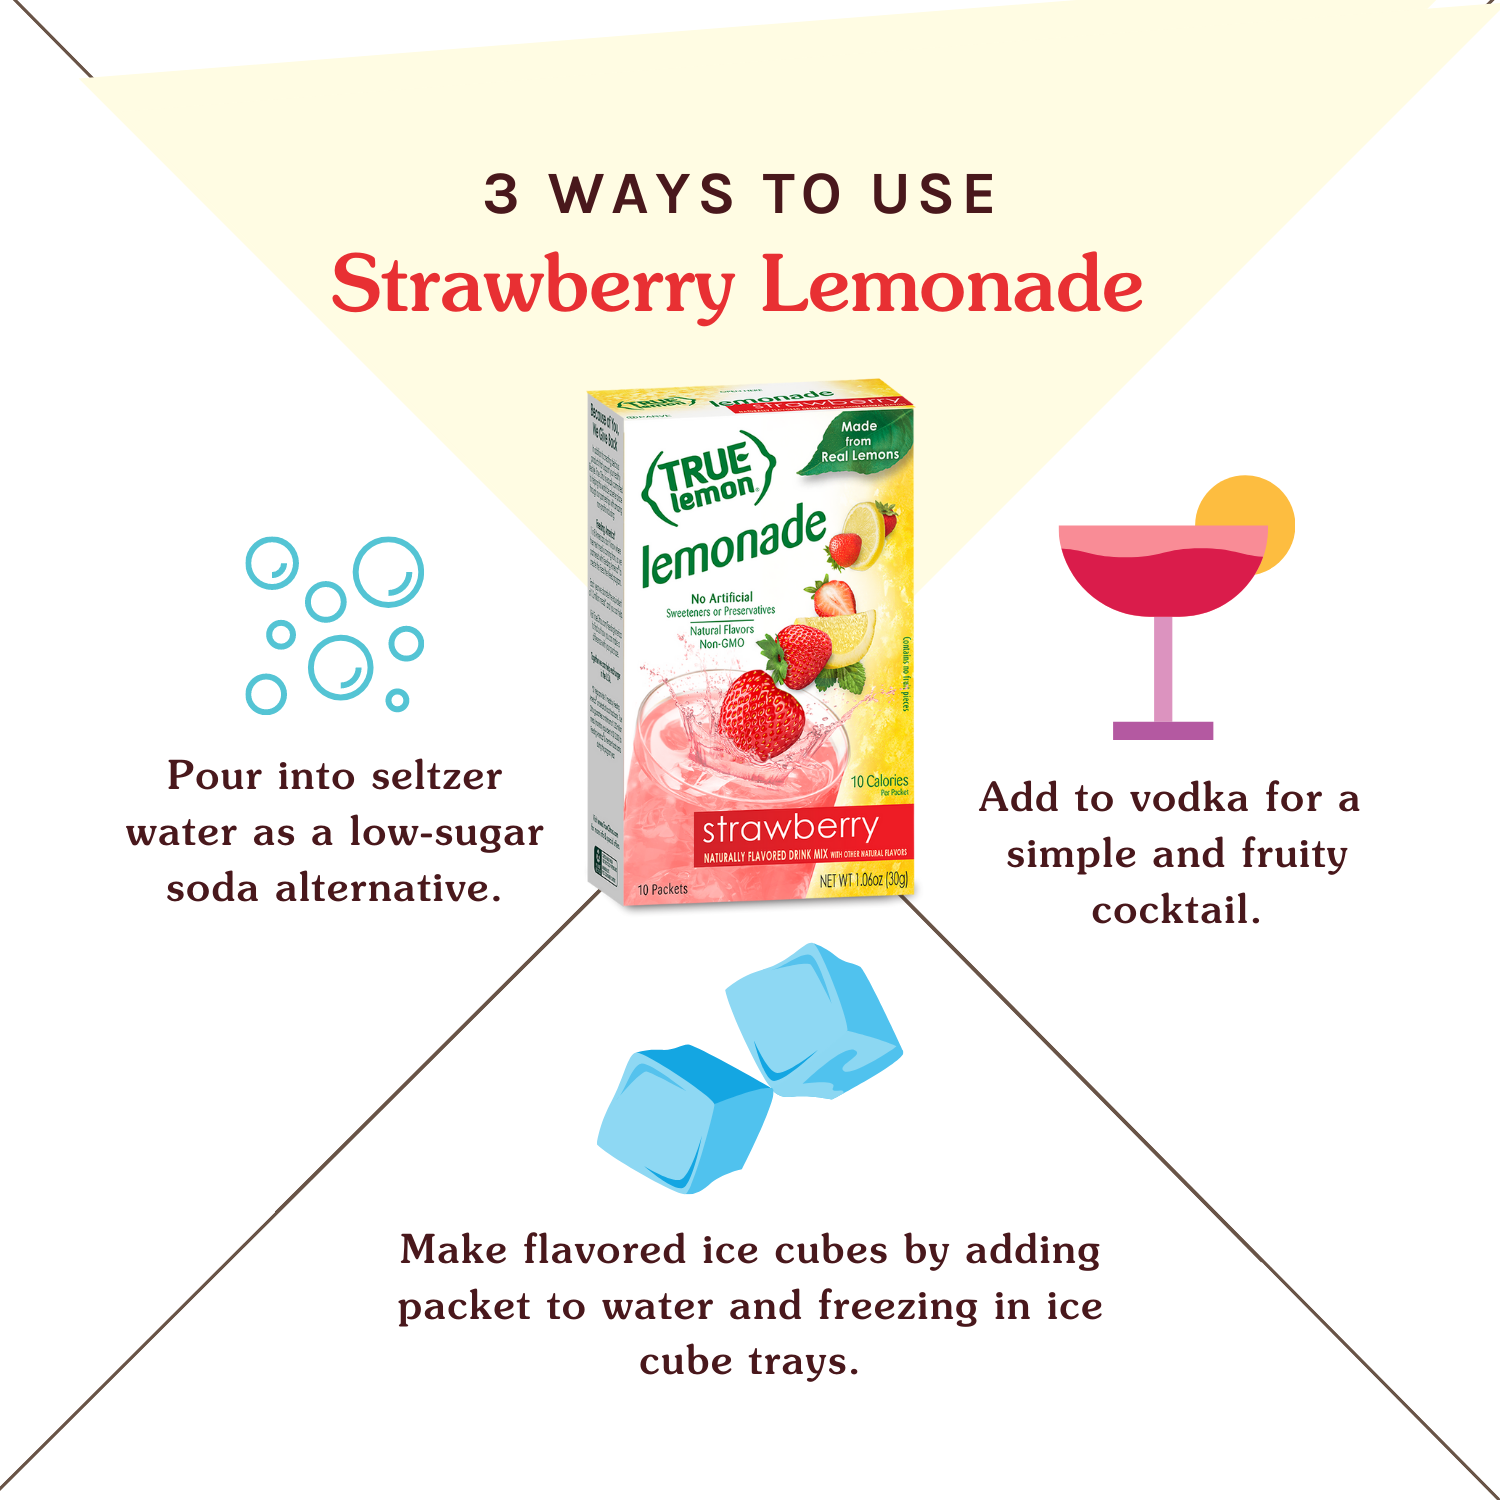 Three ways to use Strawberry Lemonade: in a cocktail, to make flavored ice cubes, use in seltzer water